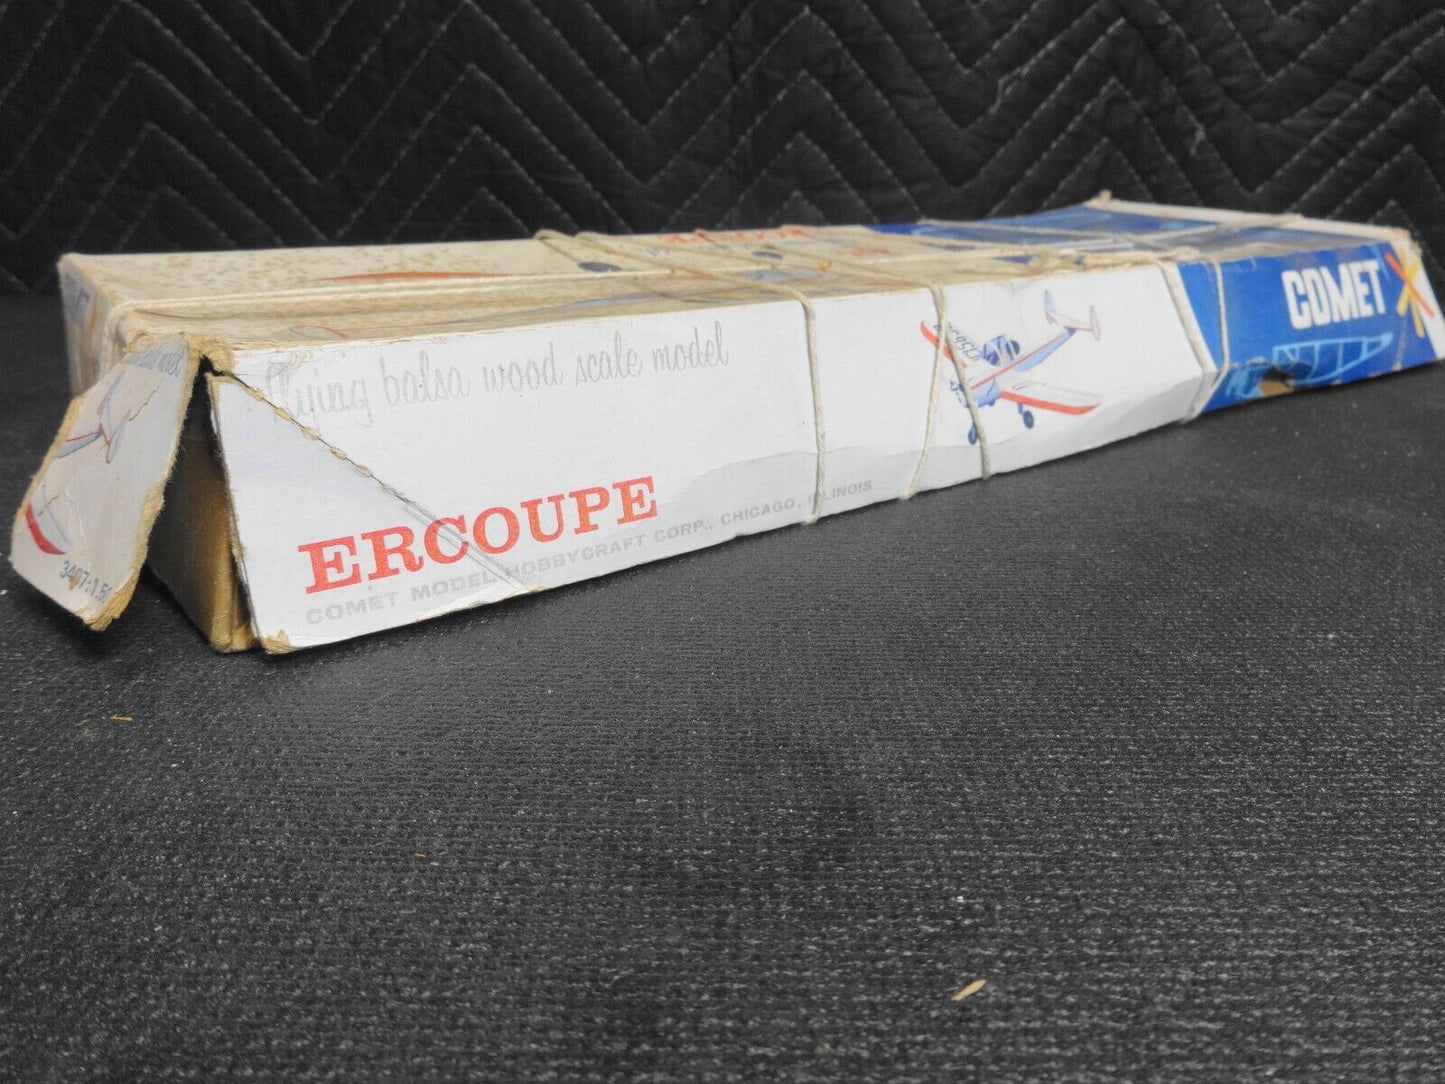 Vintage Comet Ercoupe Model Airplane Kit NOS - Distressed Box